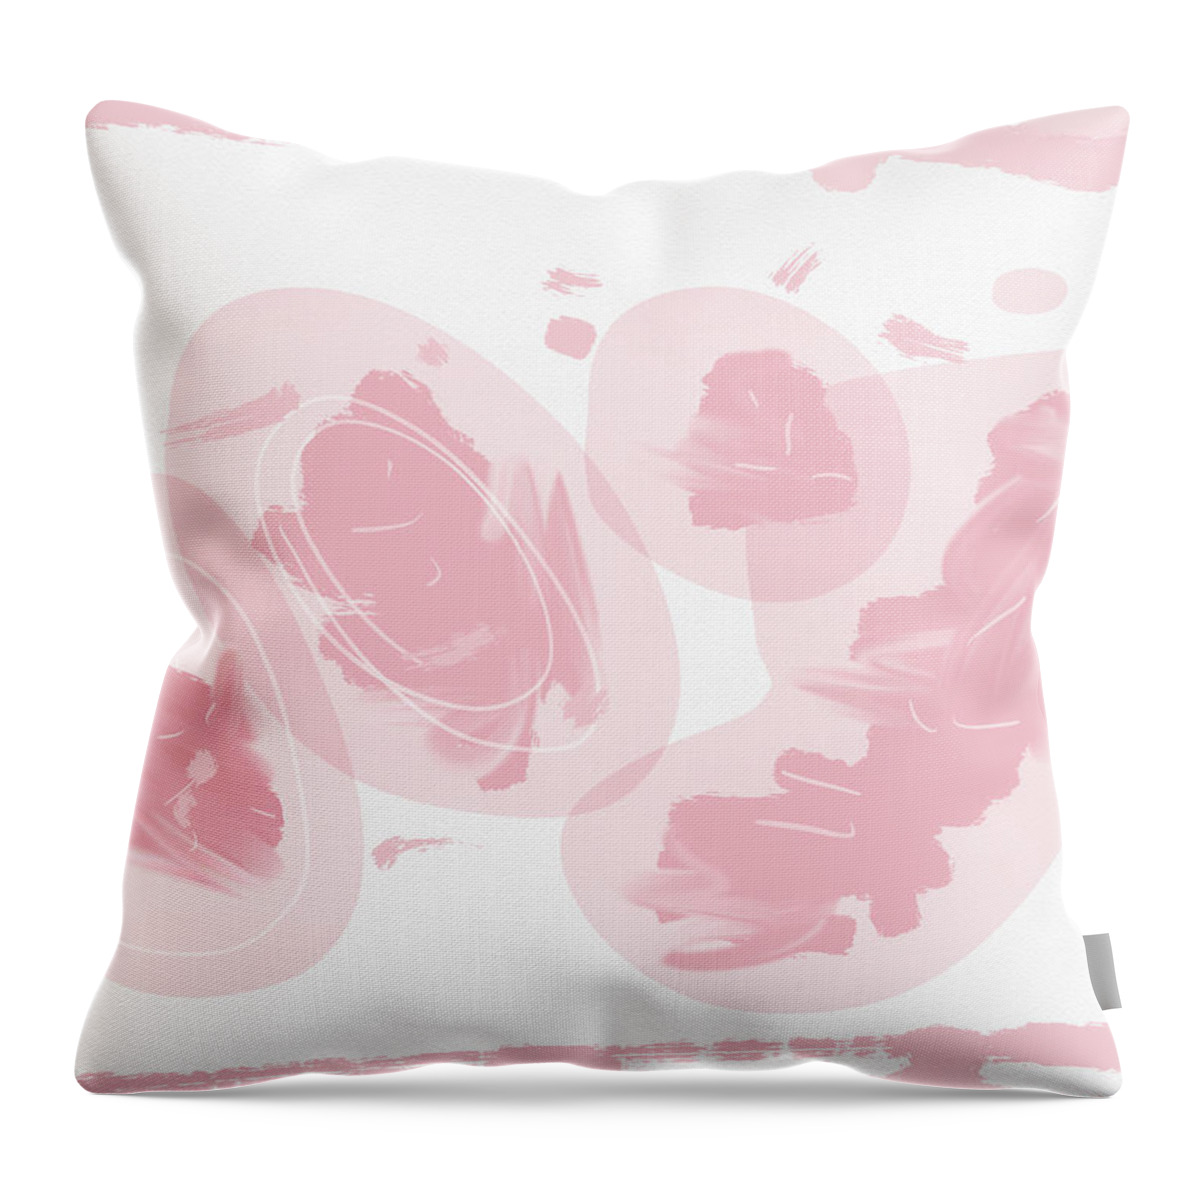 Encestra Throw Pillow featuring the digital art Encestra 3 - Minimal Abstract Painting - Pink, Rose Large Wall Art for Interior Spaces by Studio Gra by Studio Grafiikka